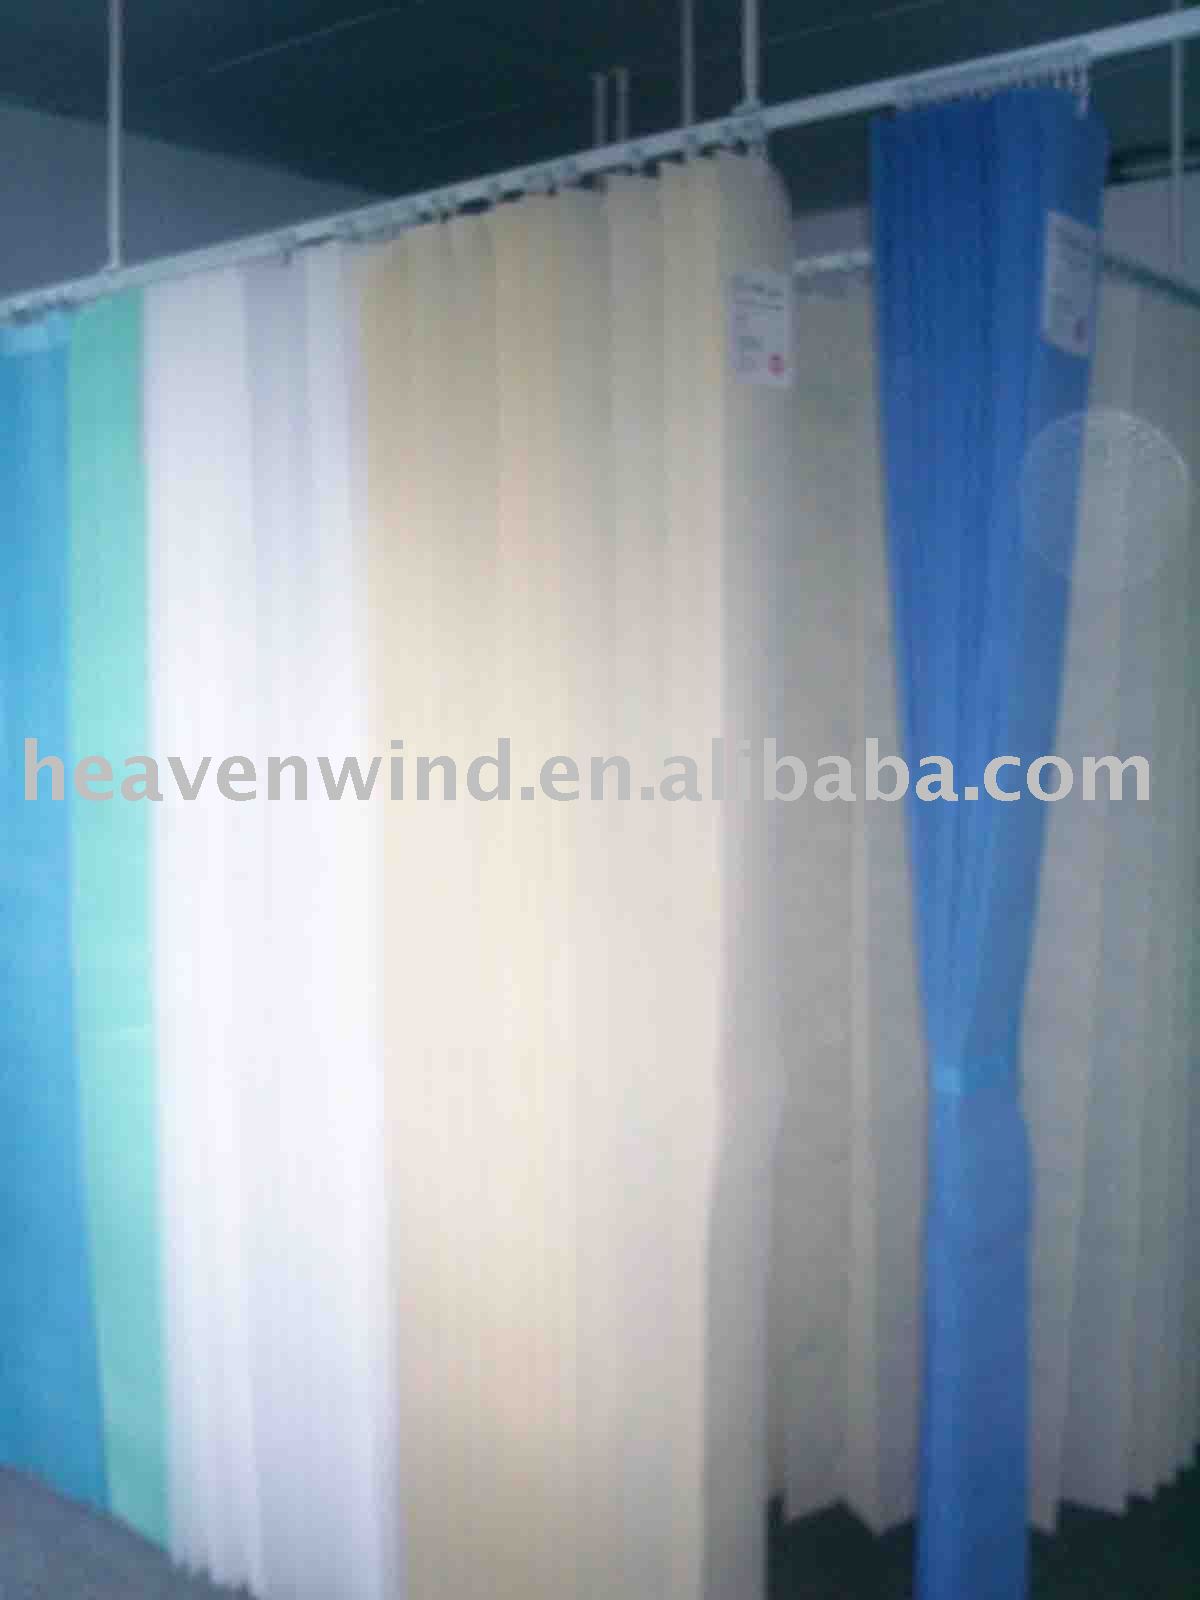 View Product Details: Hospital Bed Screen Curtain